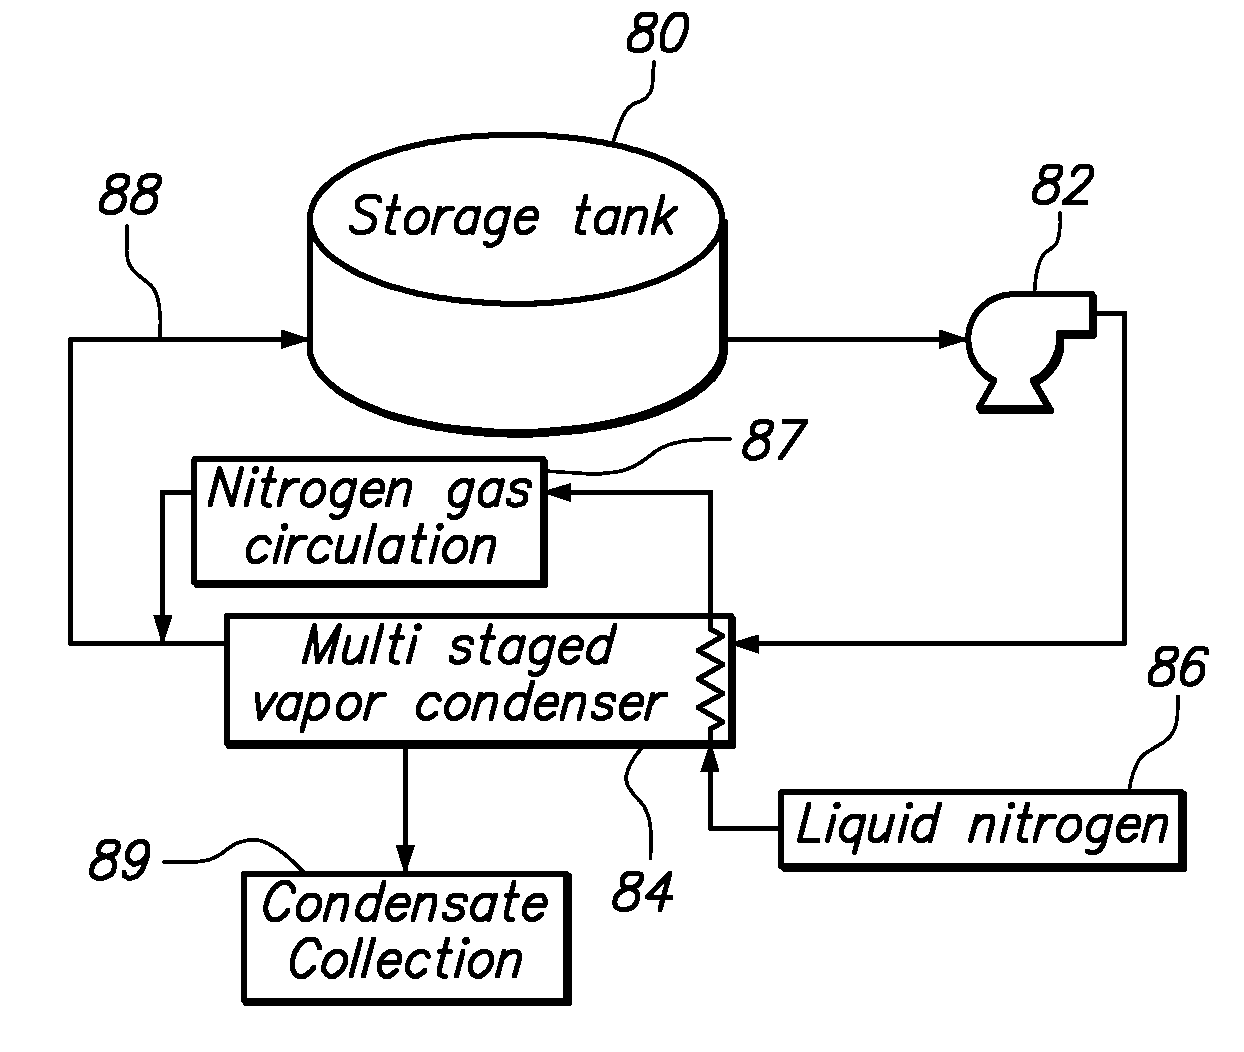 Removing Volatile Vapors From A Storage Vessel